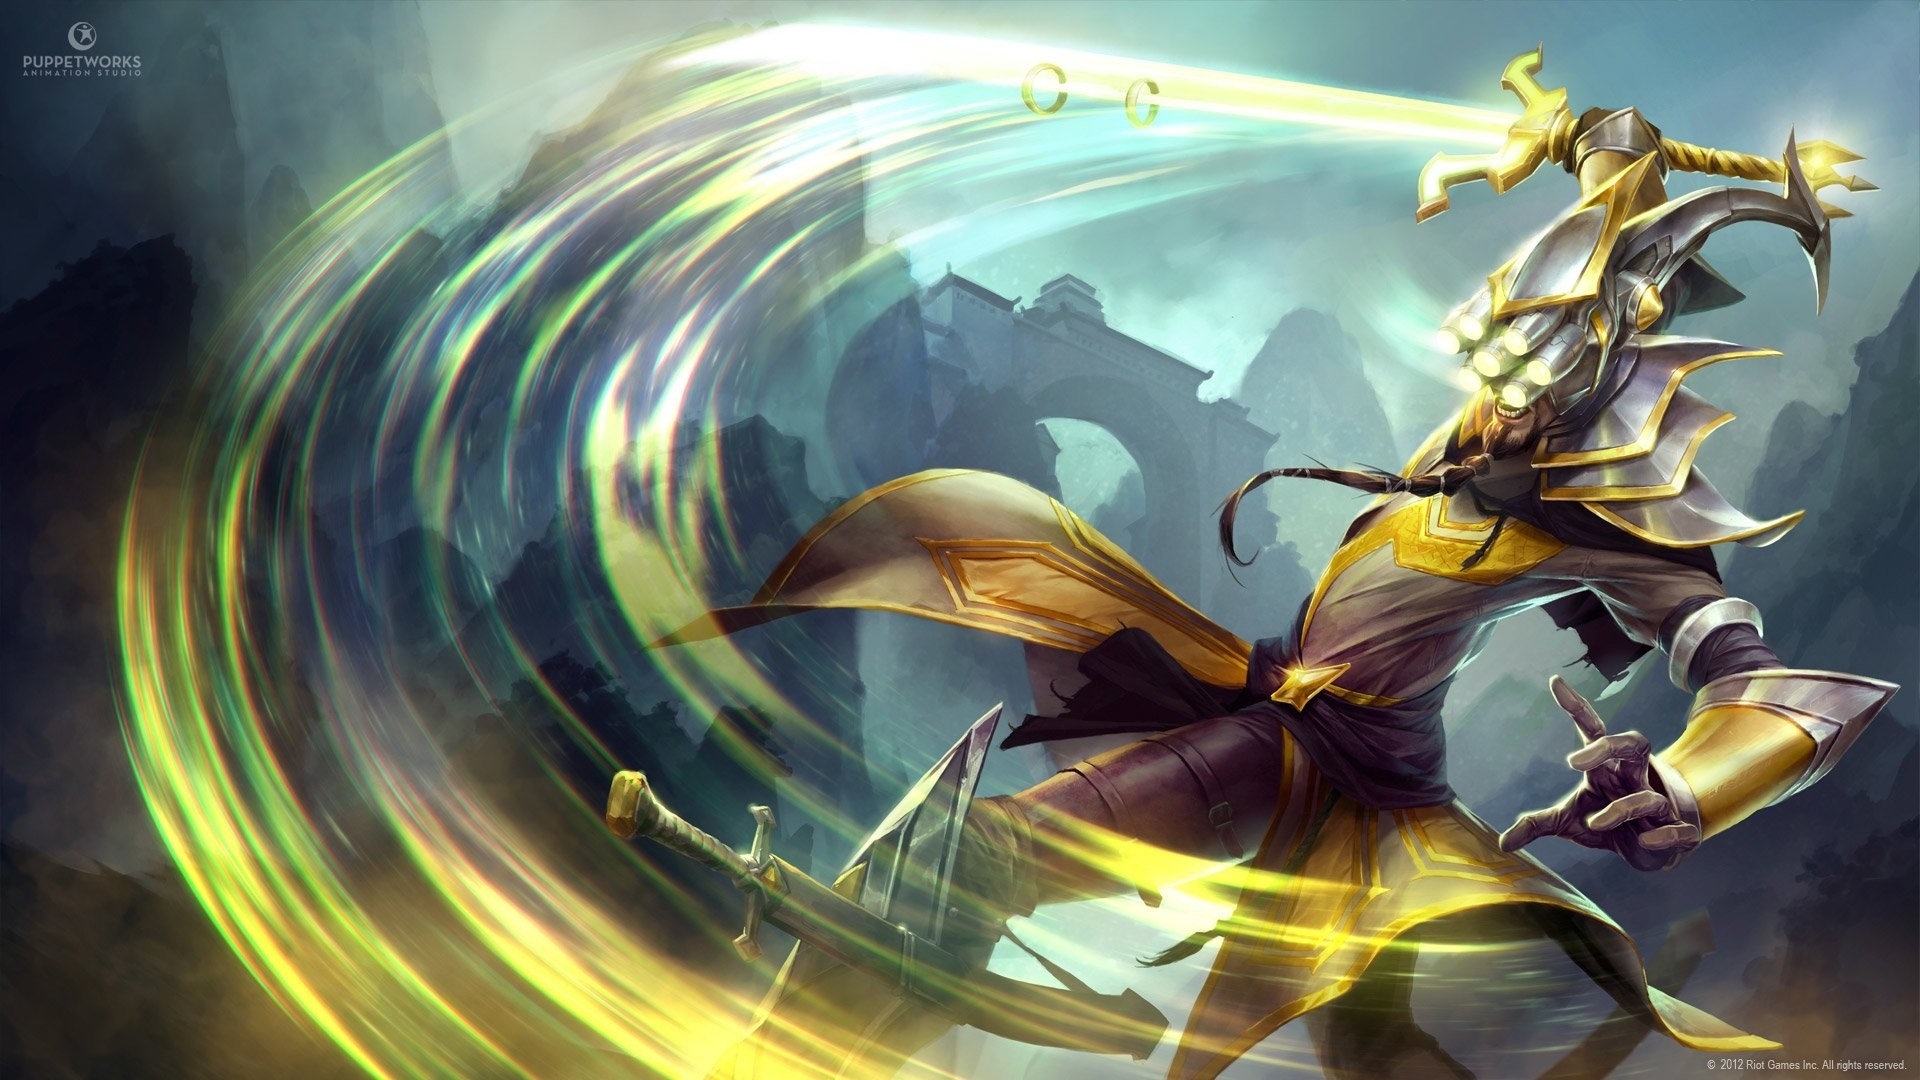 1920x1080 Title : 37 master yi (league of legends) hd wallpapers | background images.  Dimension : 1920 x 1080. File Type : JPG/JPEG